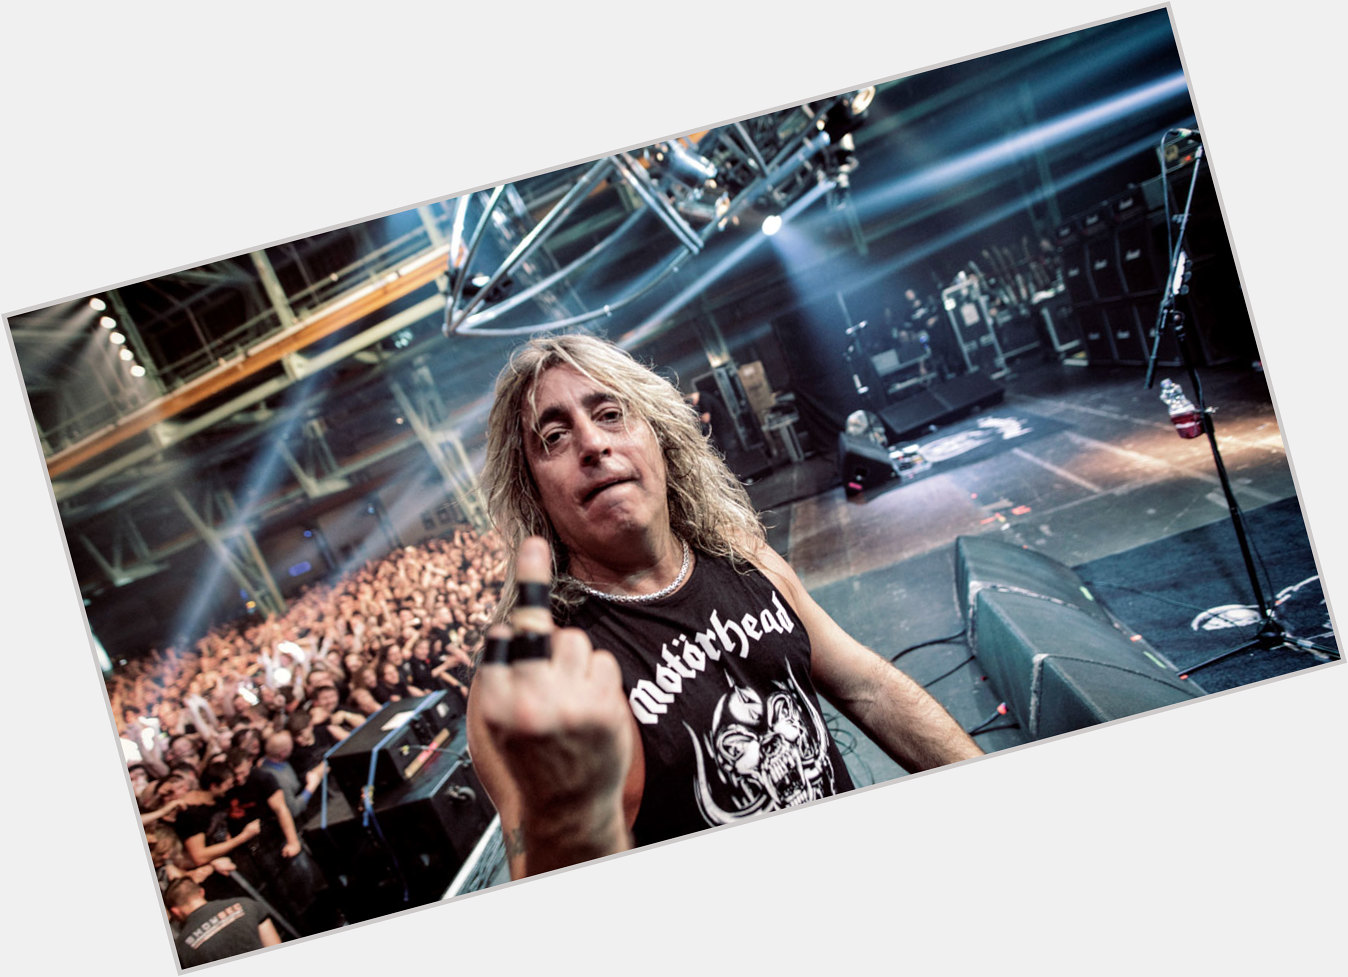 Happy 58 birthday to The Scorpions drummer Mikkey Dee, who also played with Motörhead and King Diamond. 